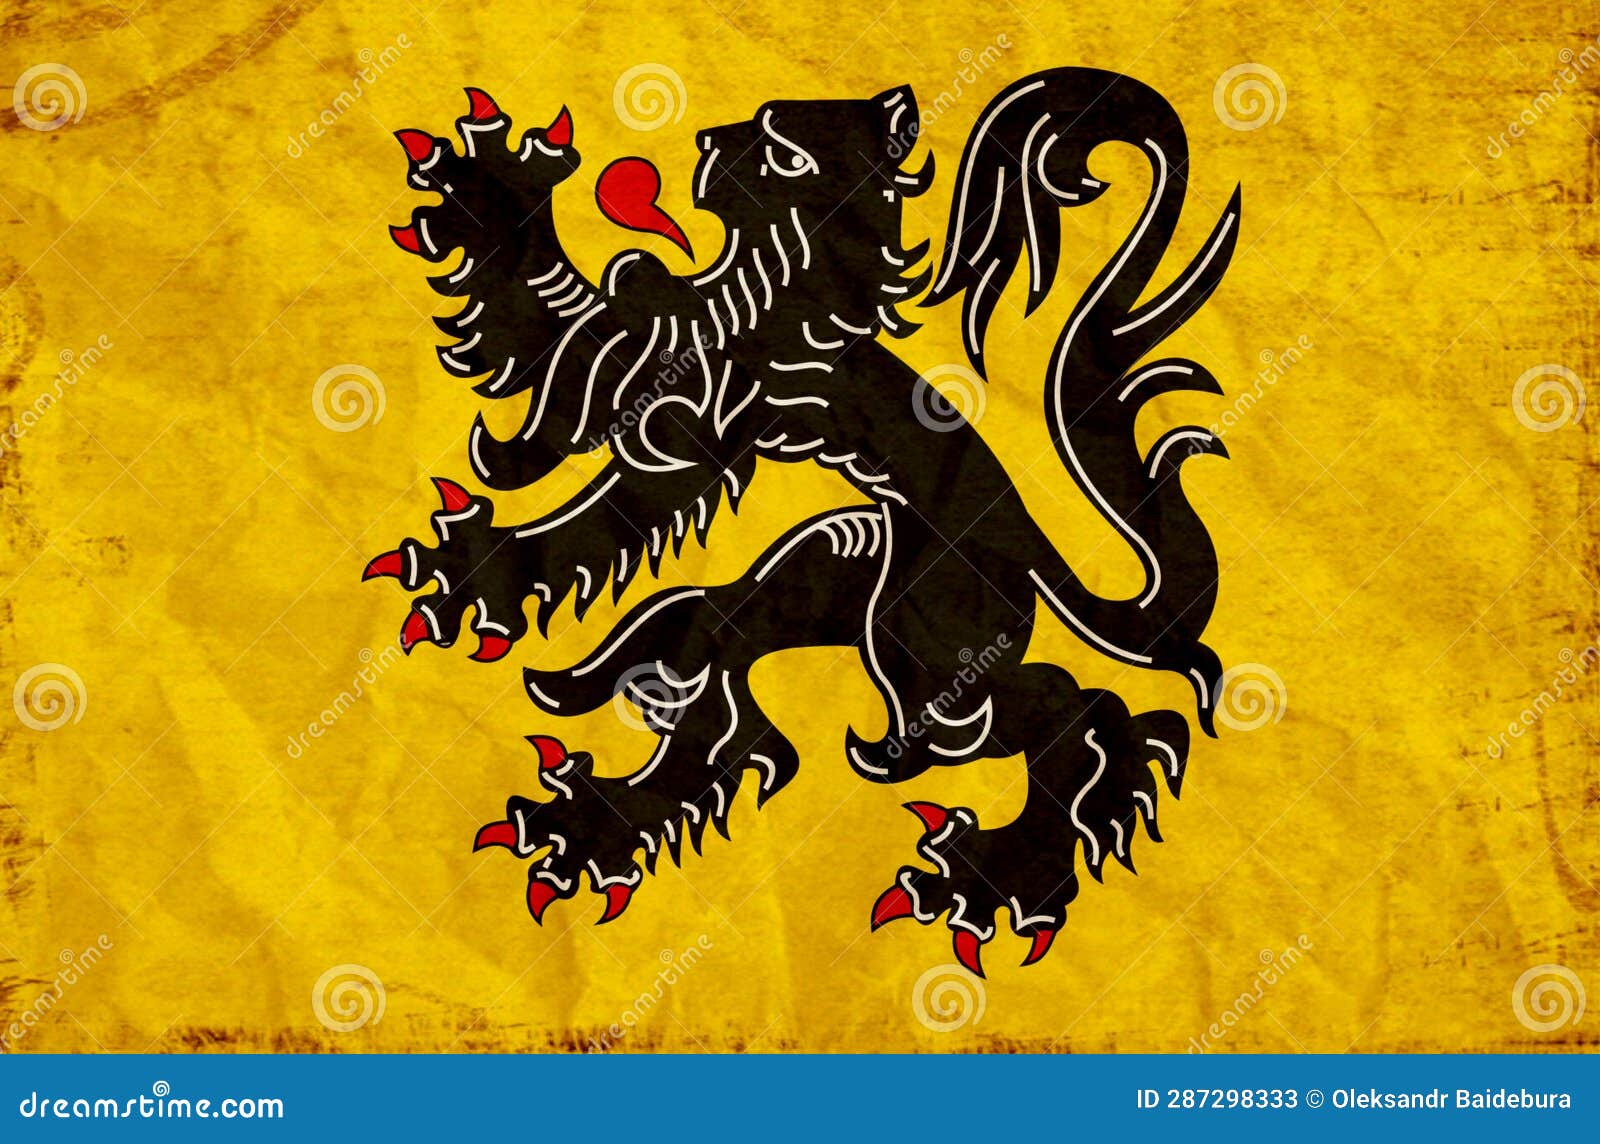 Flag of the Kingdom of Belgium is a Sovereign Power in Western Europe ...